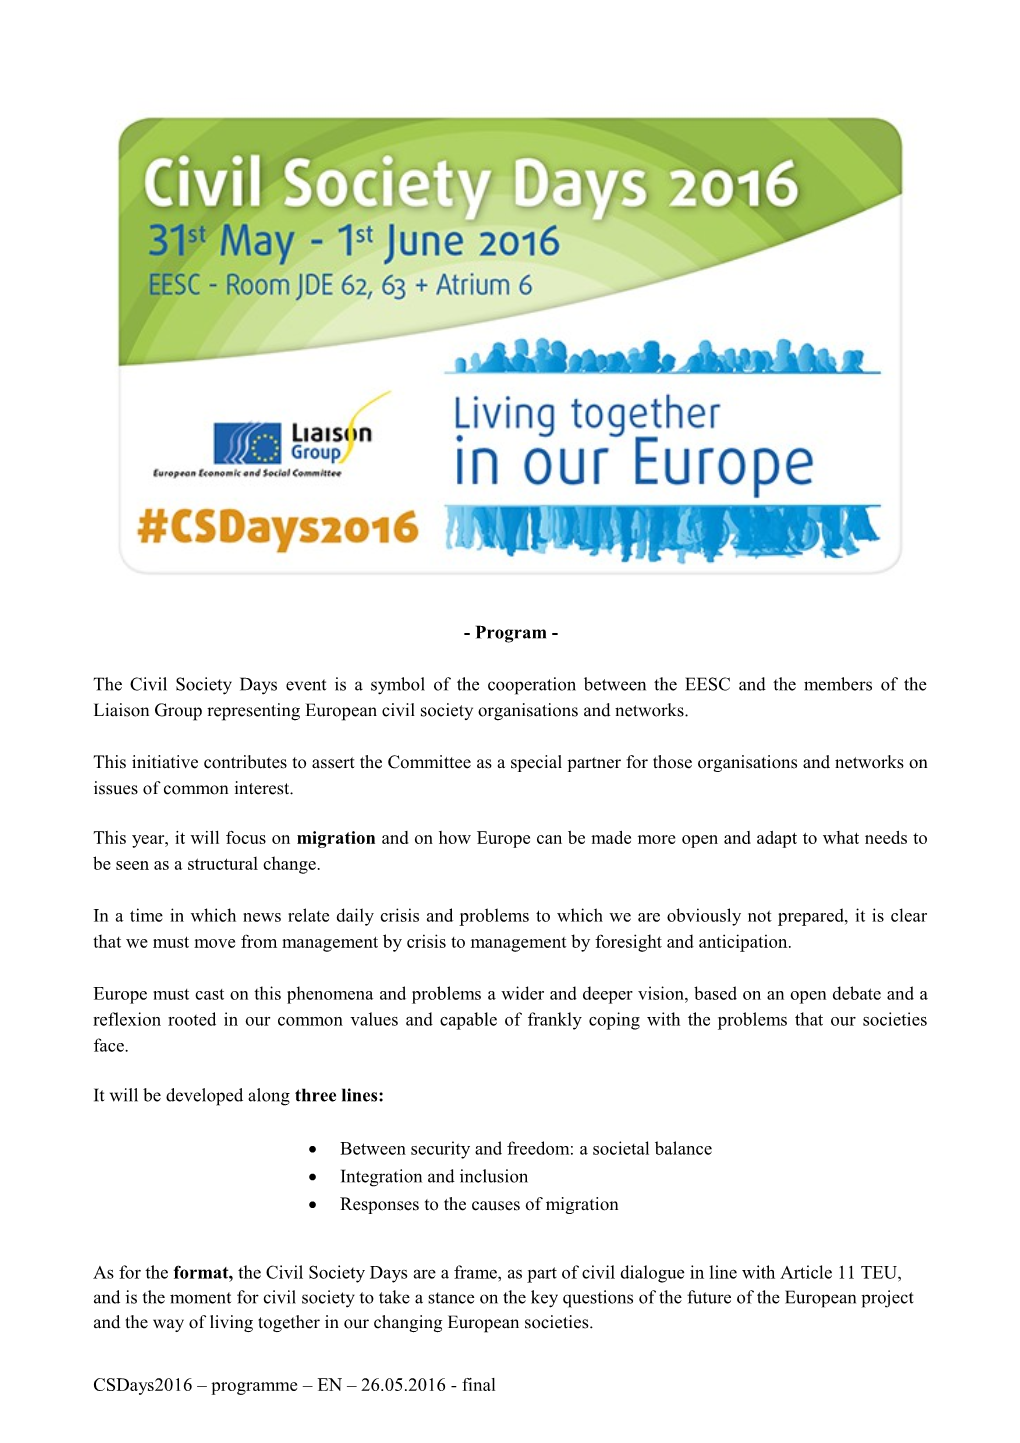 The Civil Society Days Event Is a Symbol of the Cooperation Between the EESC and the Members